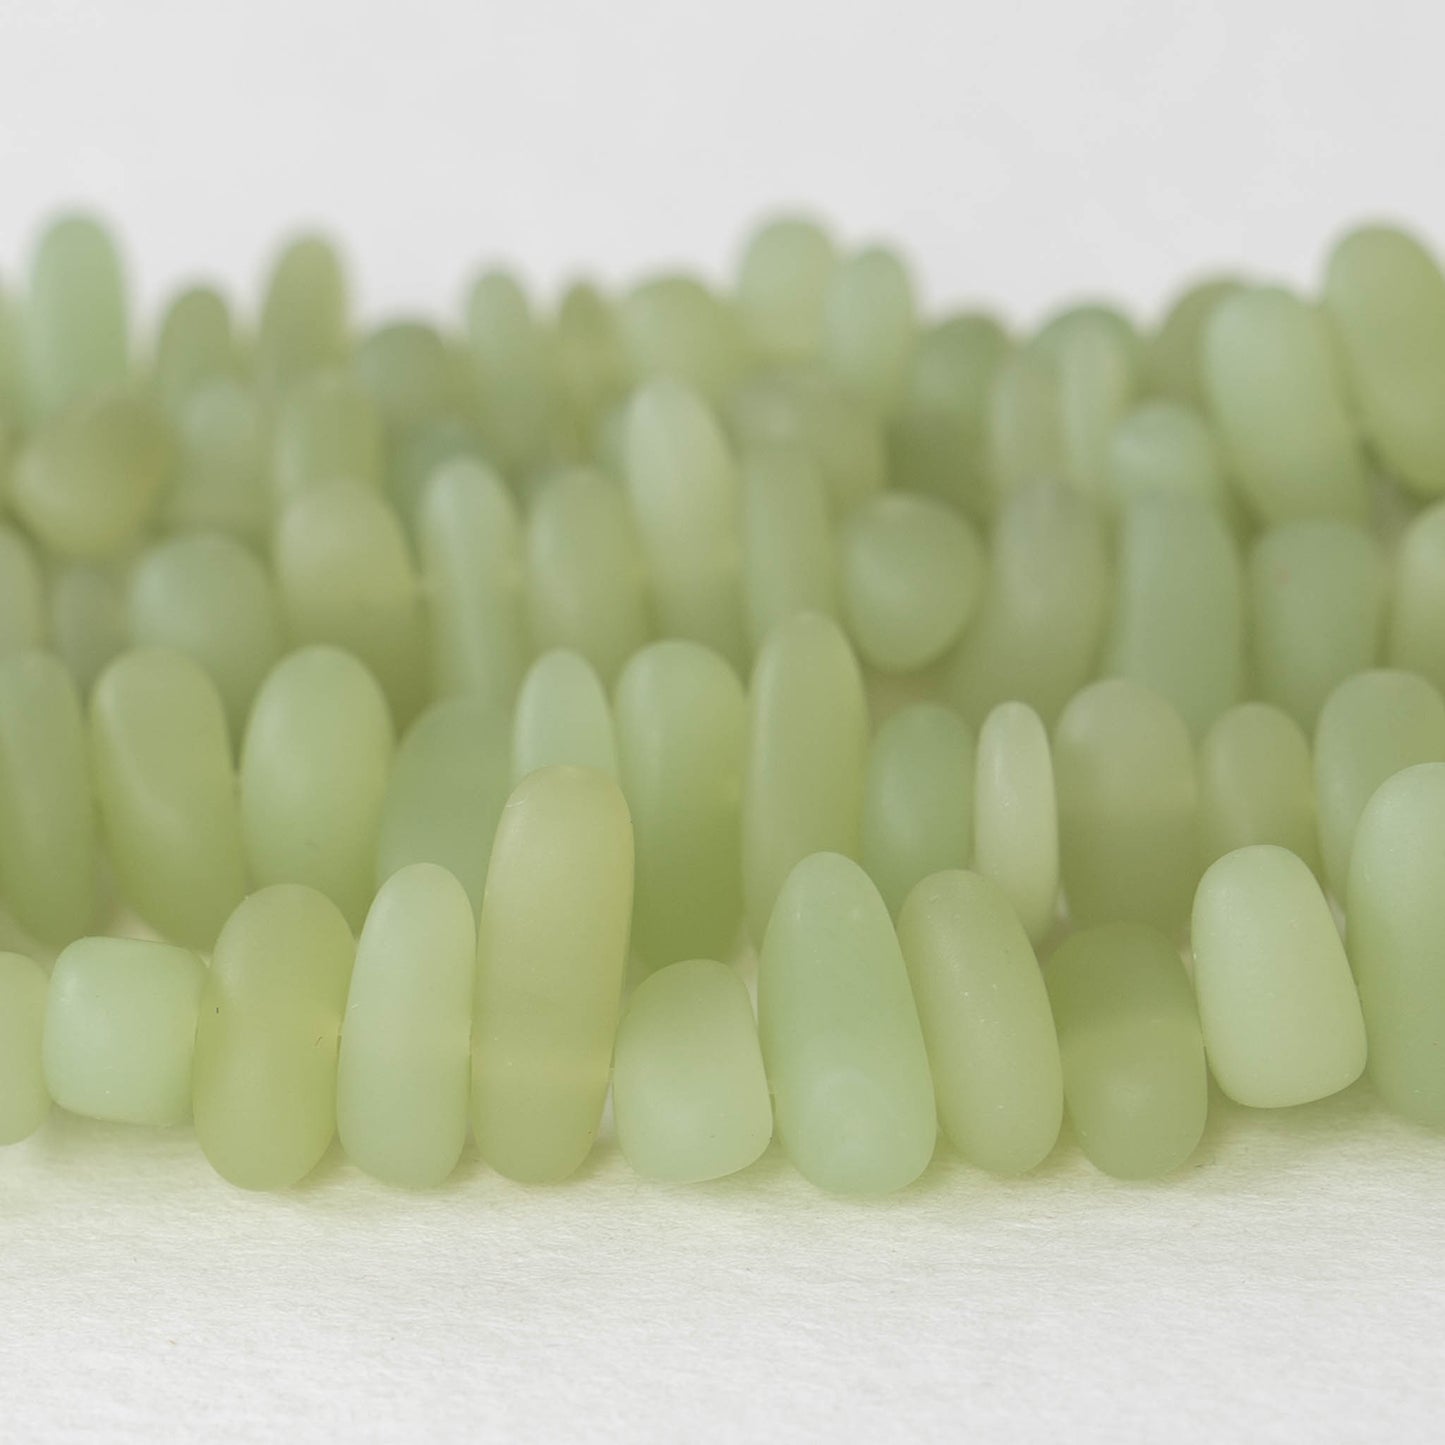 8-13mm Frosted Glass Pebbles - Opaque Light Olive Green ~ 50 Beads